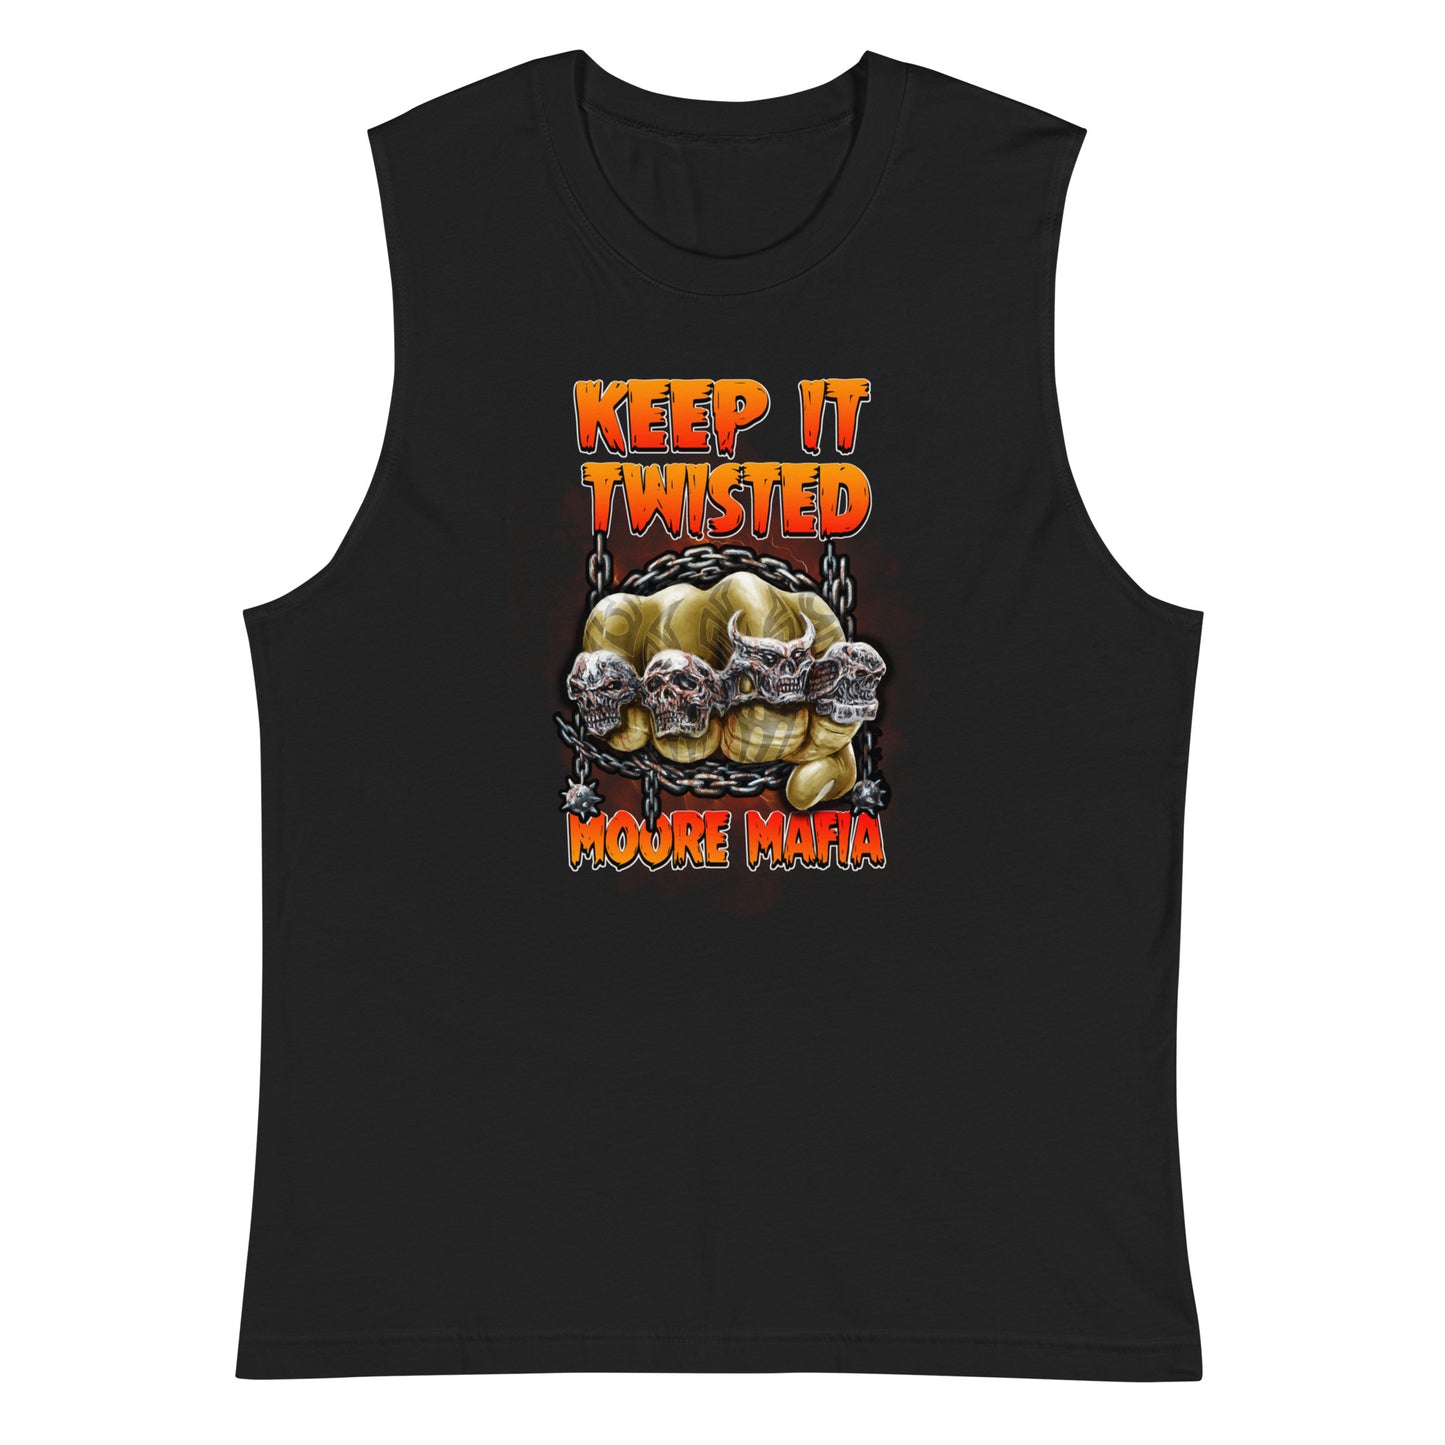 Keep It Twisted Muscle Shirt